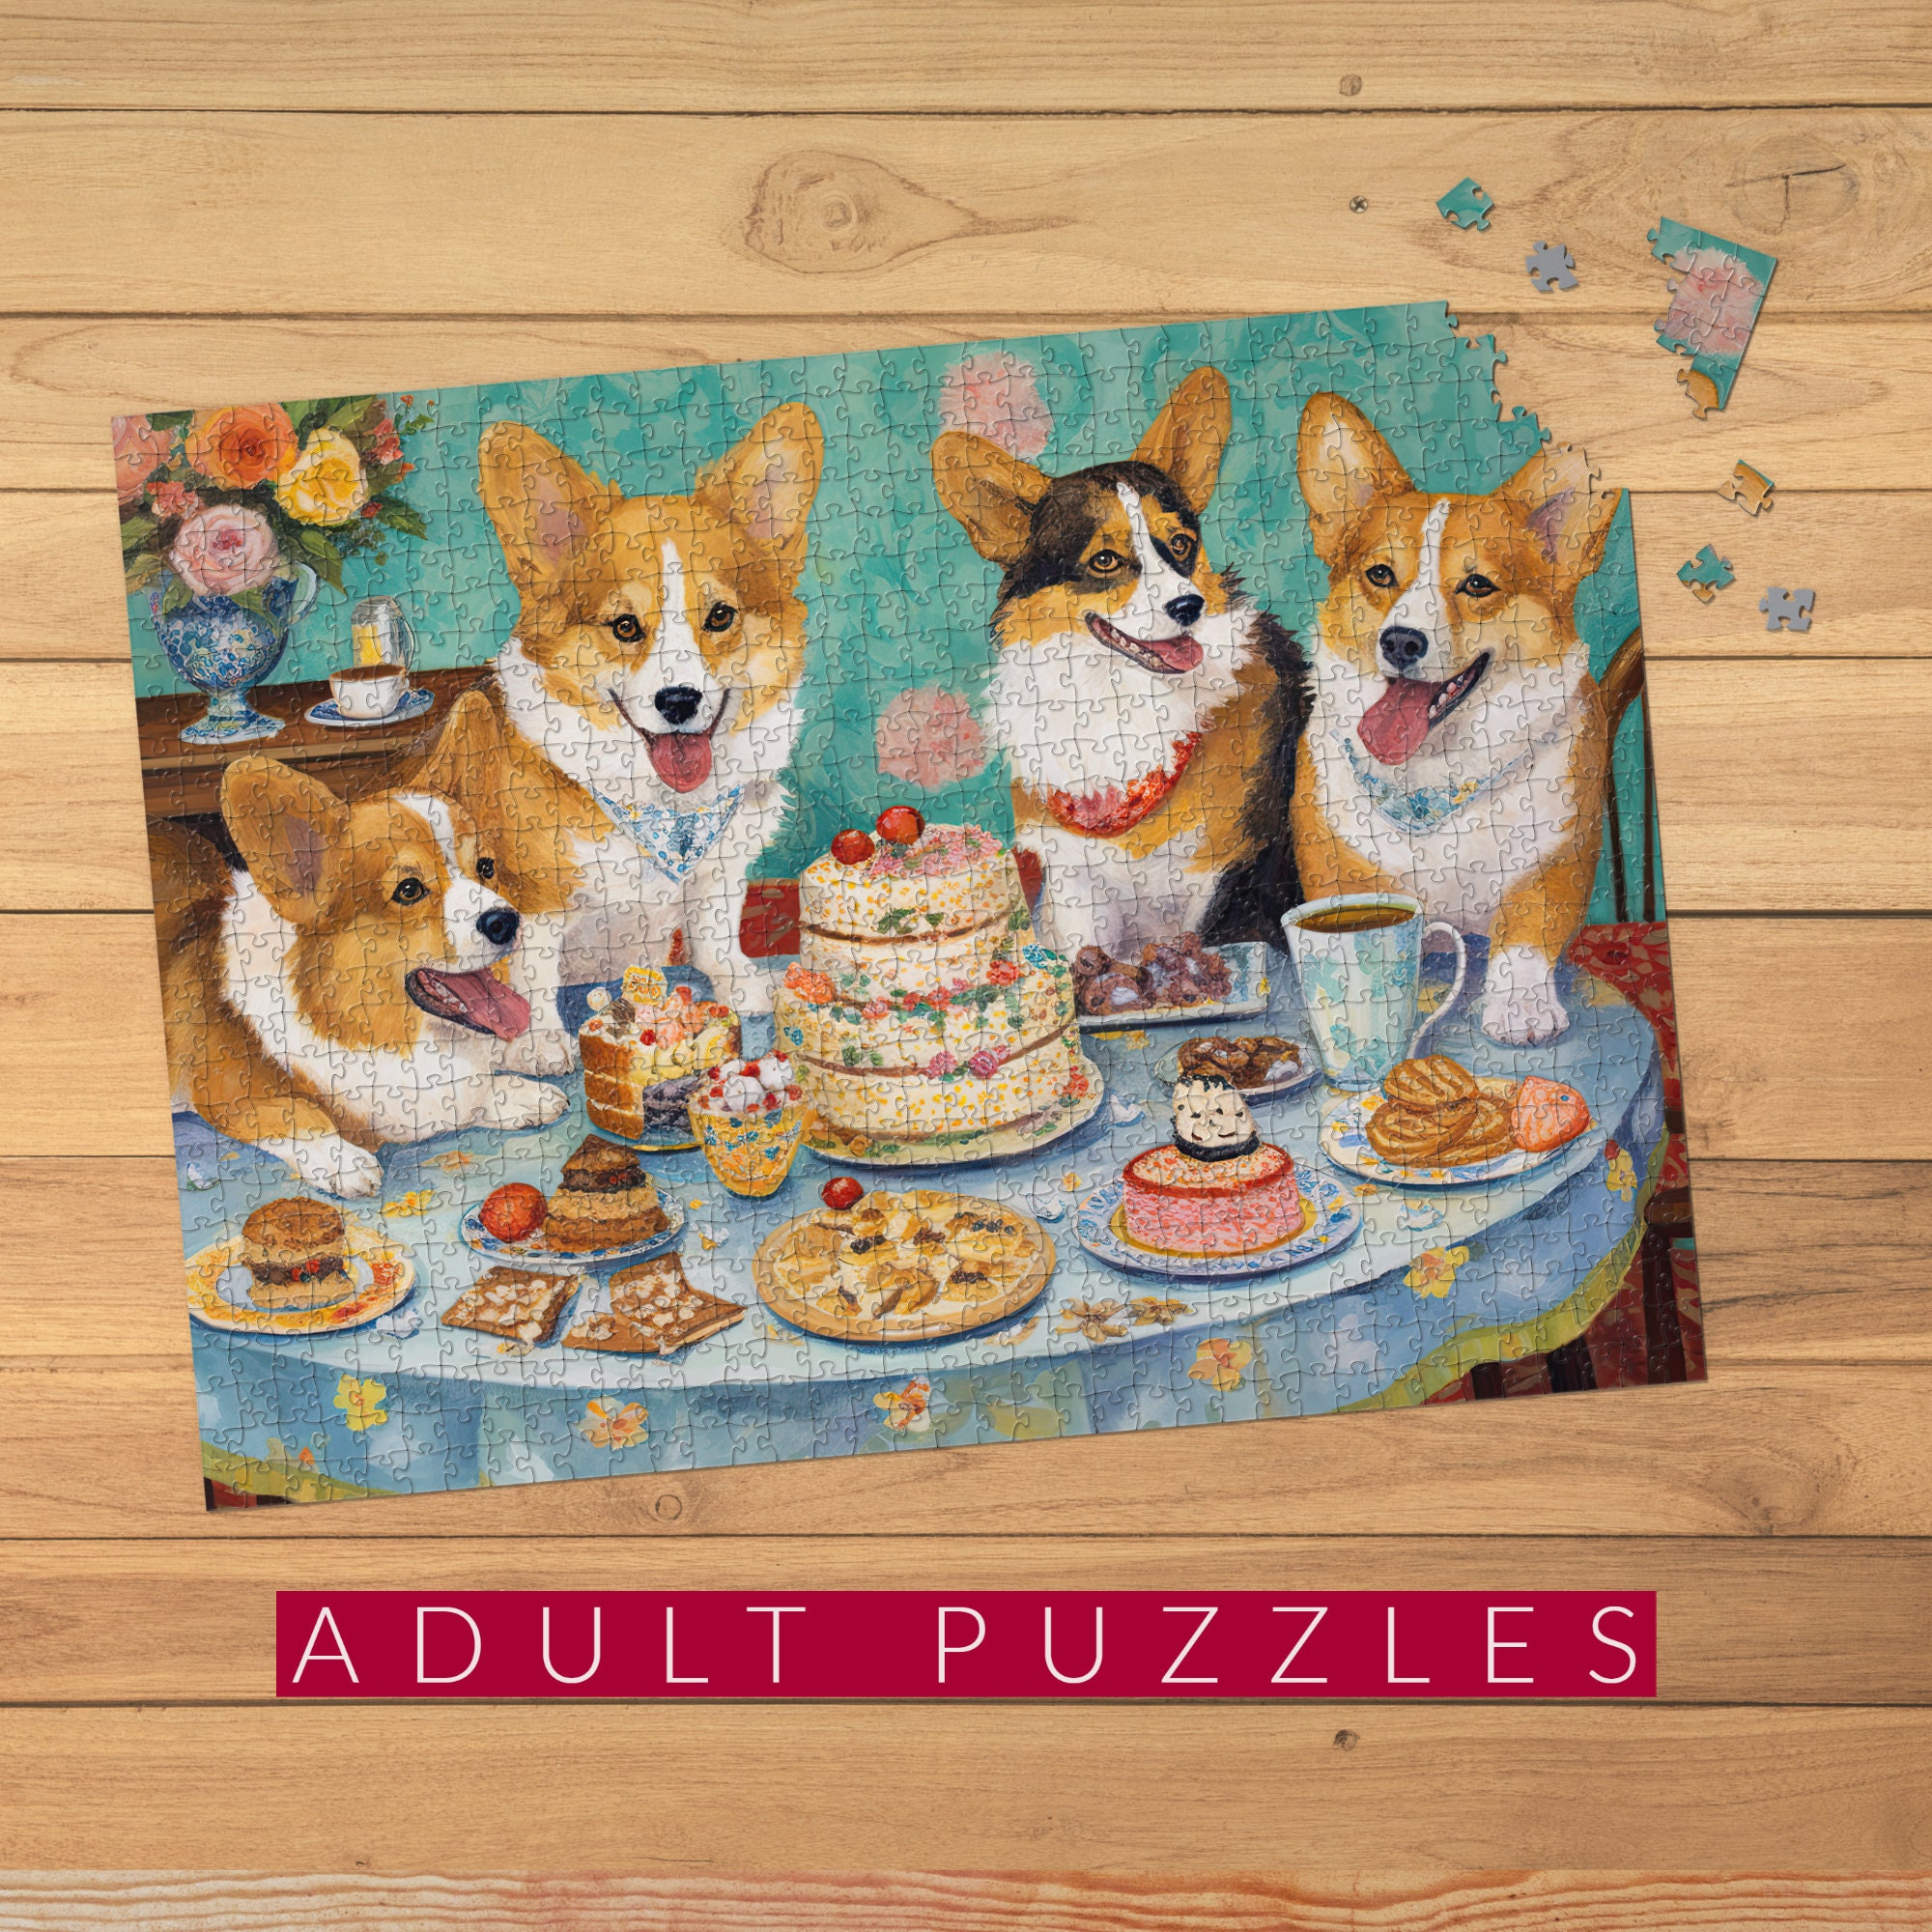 Wzvzgz Corgi Jigsaw Puzzles 300 Pieces for Adults - Puzzles for Adults and Children Home Decoration, 300 Pcs